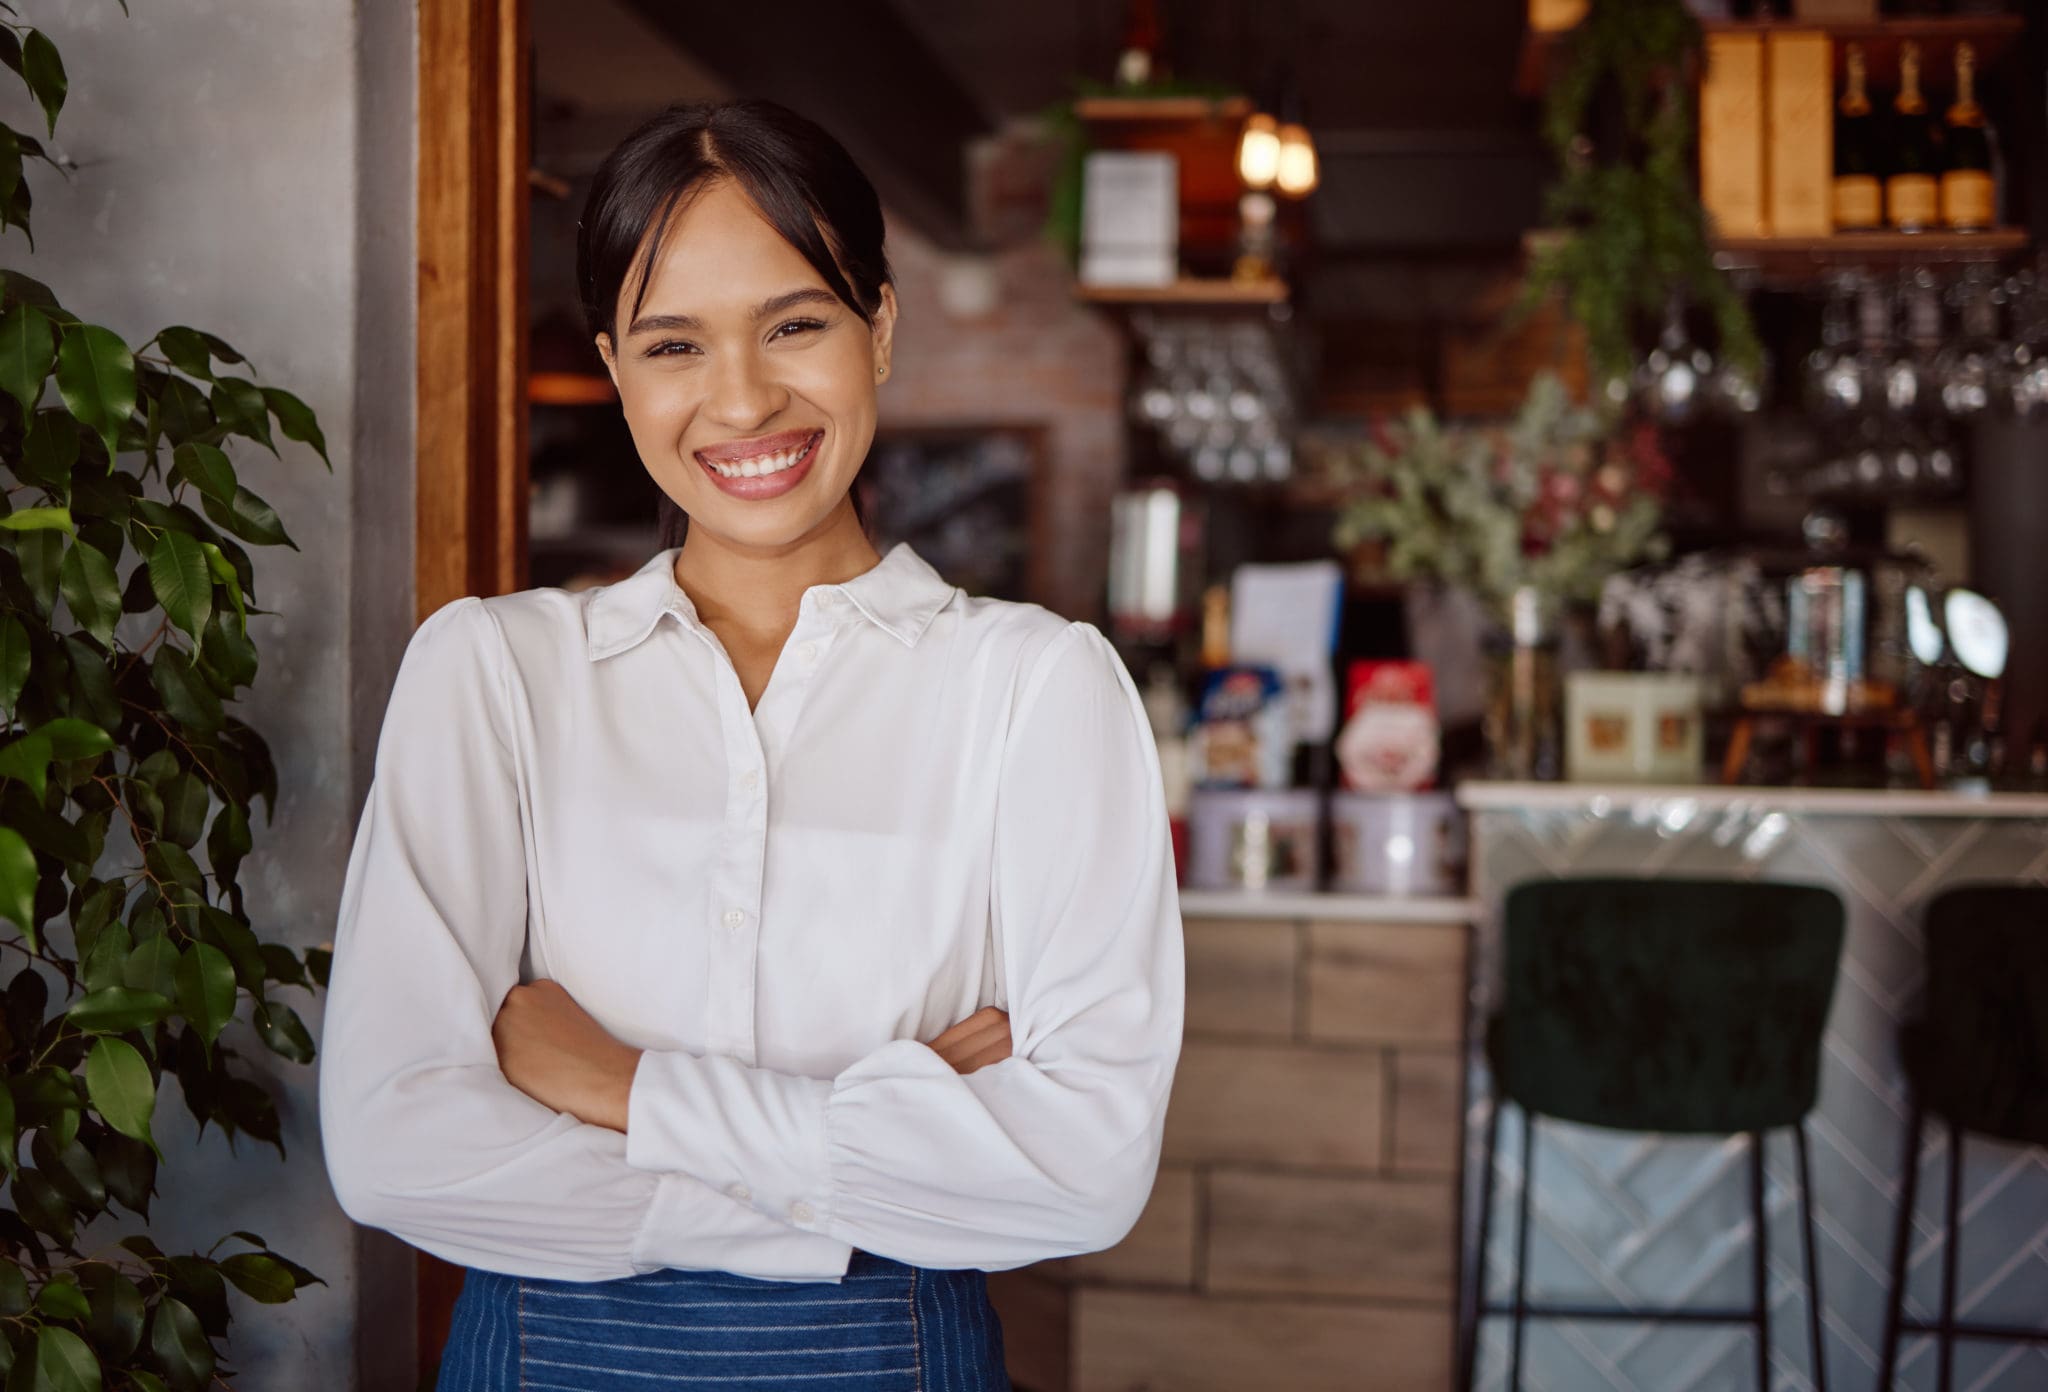 Small business success, cafe restaurant and happy woman leader portrait in Costa Rica hospitality i